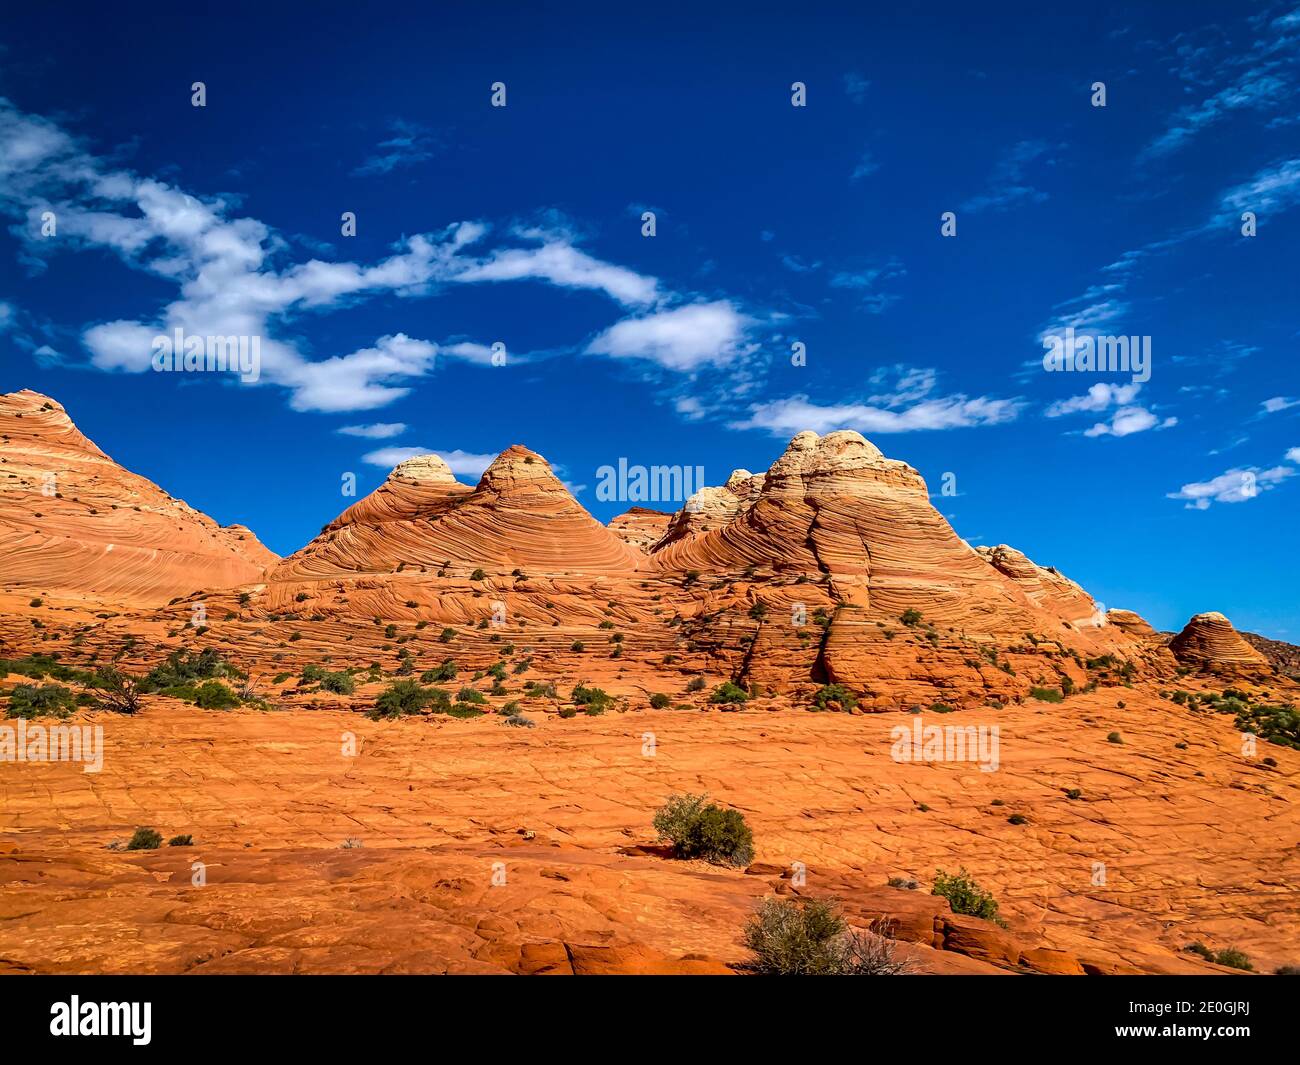 Sandstone rock formations located in Coyote Butte North, Arizona Stock Photo